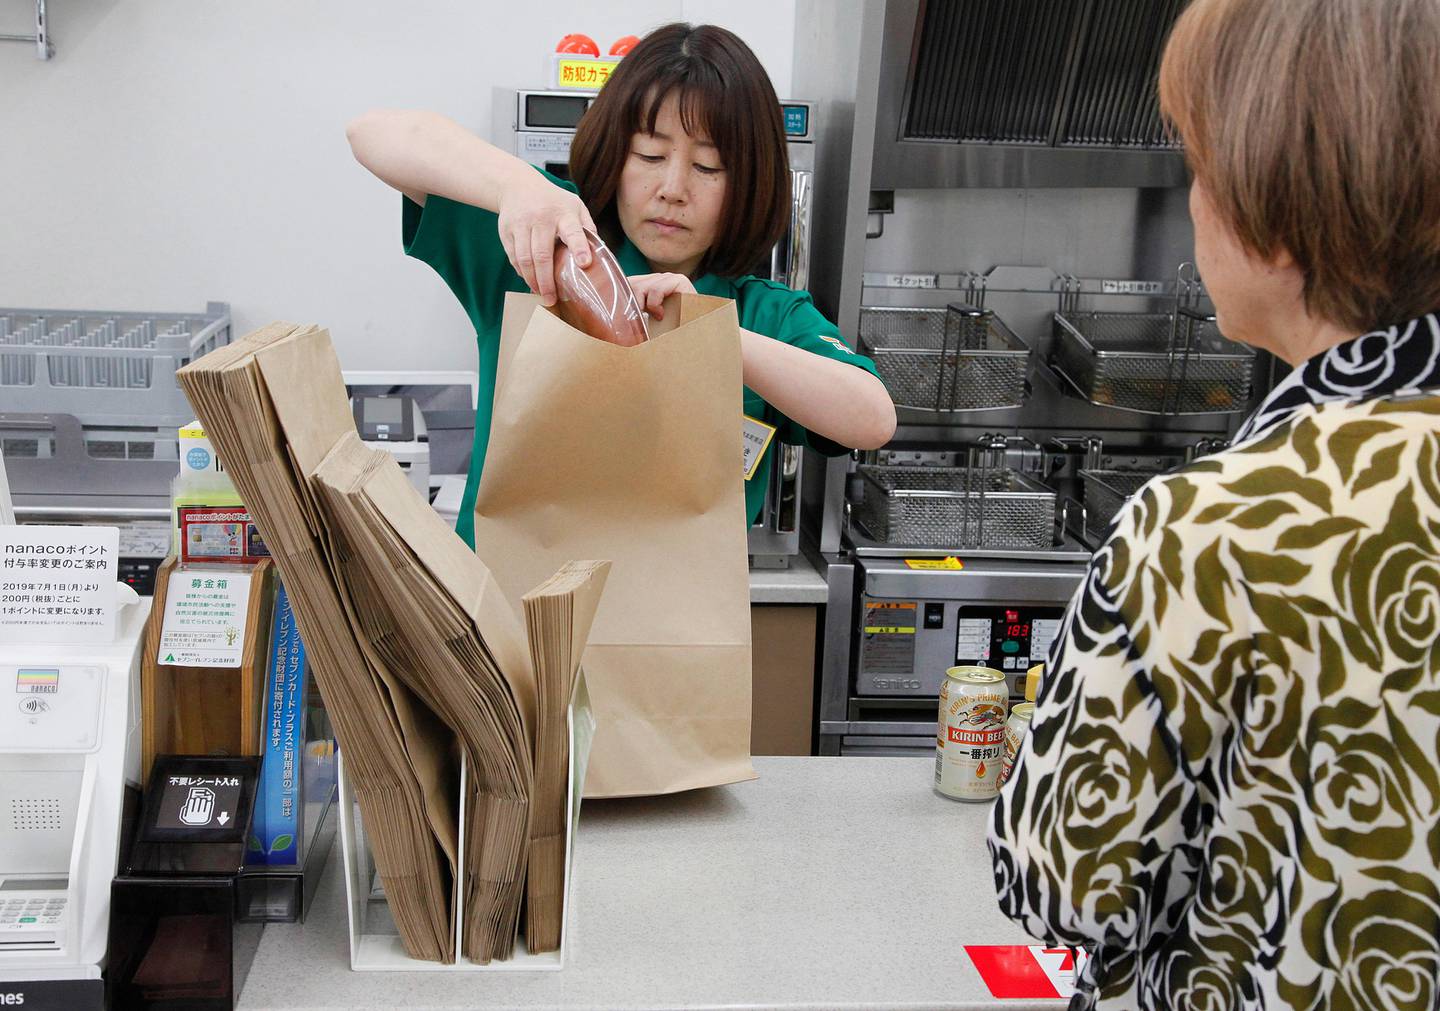 In this June 17, 2019, photo, a salesclerk puts goods into a paper bag after a customer purchased them, at a Seven-Eleven store in Yokohama, near Tokyo. Seven & i Holdings Co., a major Japanese convenience store operator, announced on May, 2019, a plan to replace all plastic shopping bags with paper by 2030 and all plastic packaging with paper, biodegradable or other reusable materials at its nearly 21,000 stores nationwide. Japan, as host of the Group of 20 Summit this weekend, hopes to lead the world in reducing plastic waste. (AP Photo/Koji Sasahara)